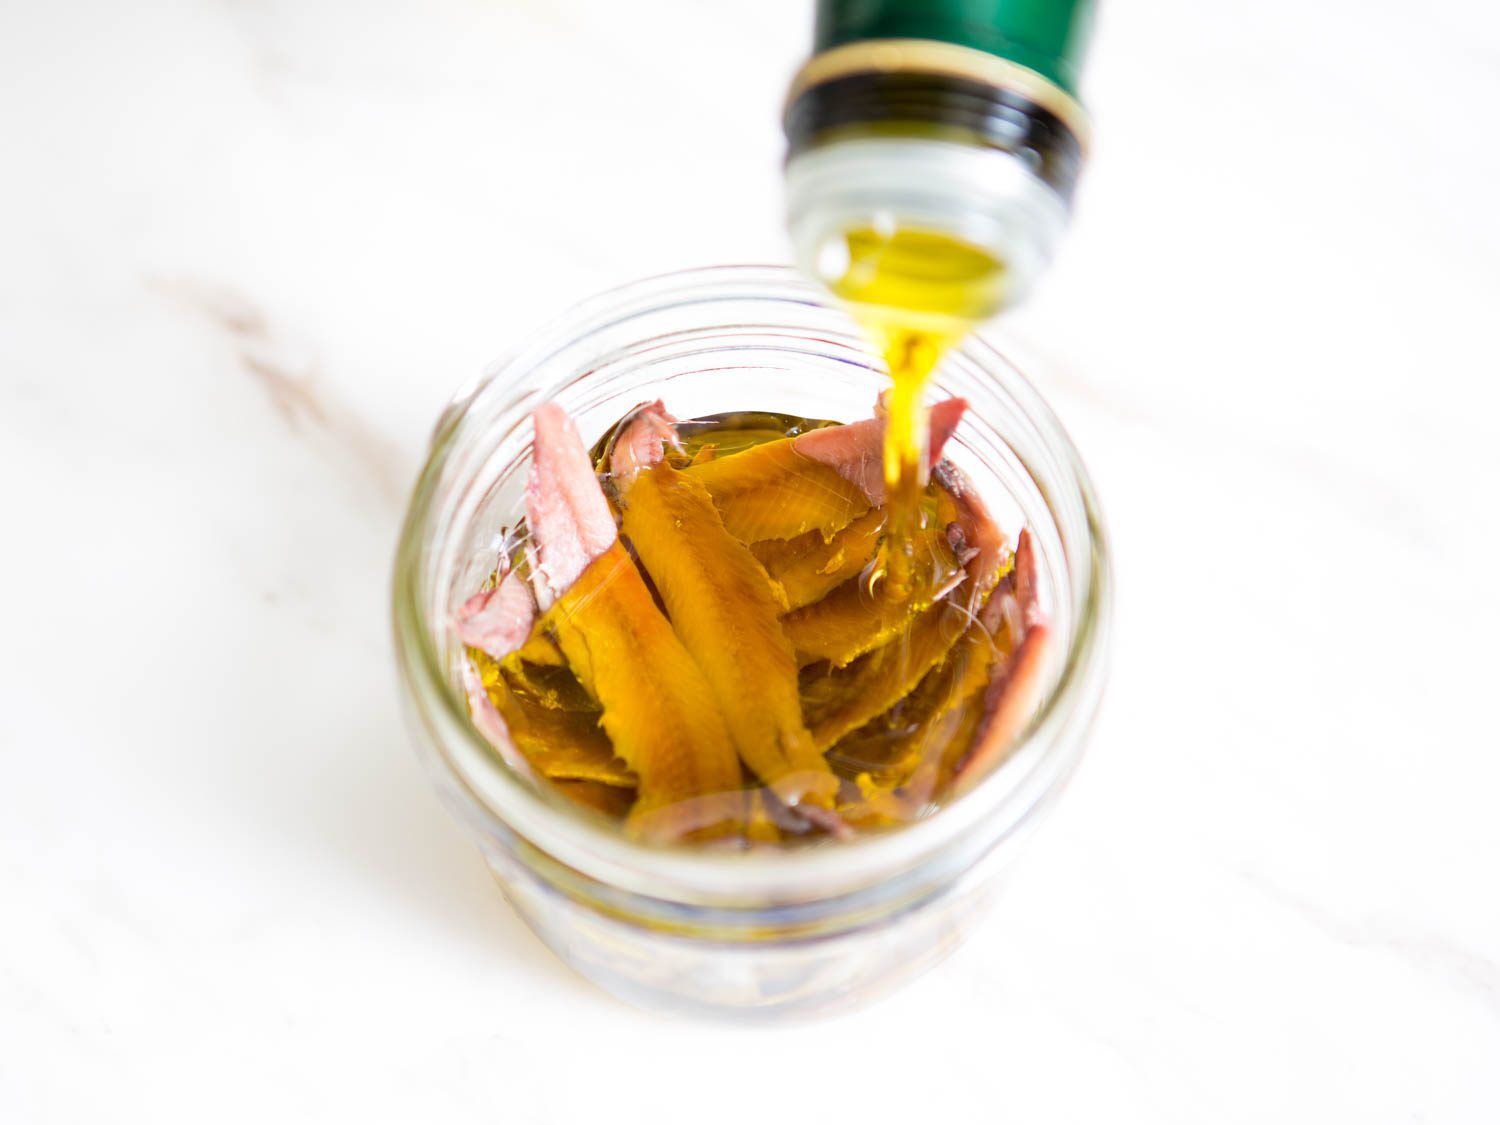 Drizzling olive oil over anchovy fillets in a glass bowl.